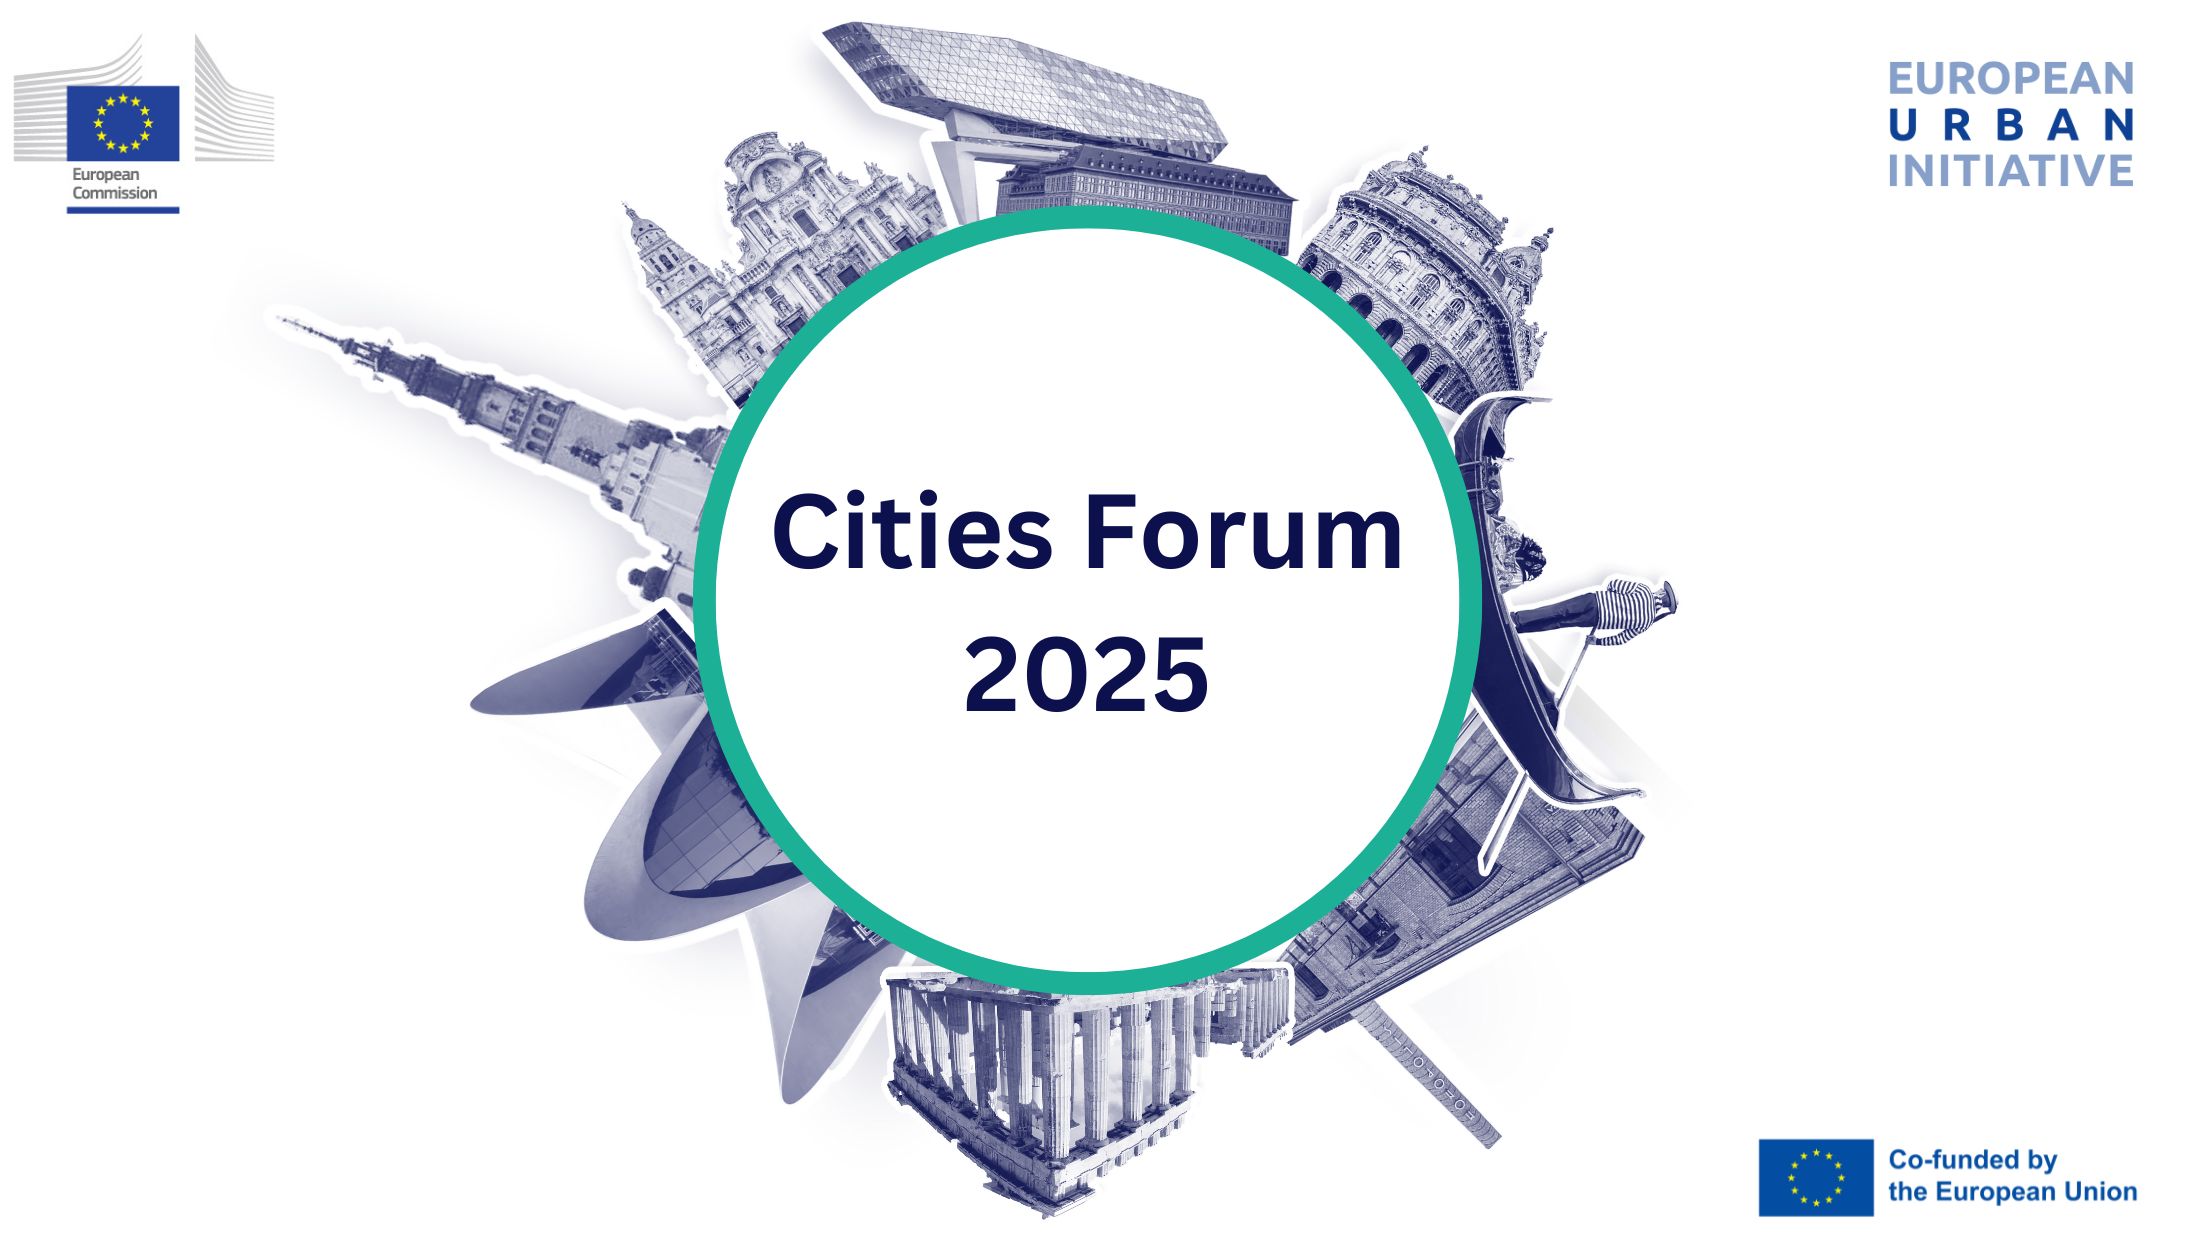 Krakow takes centre stage as host of Cities Forum 2025!